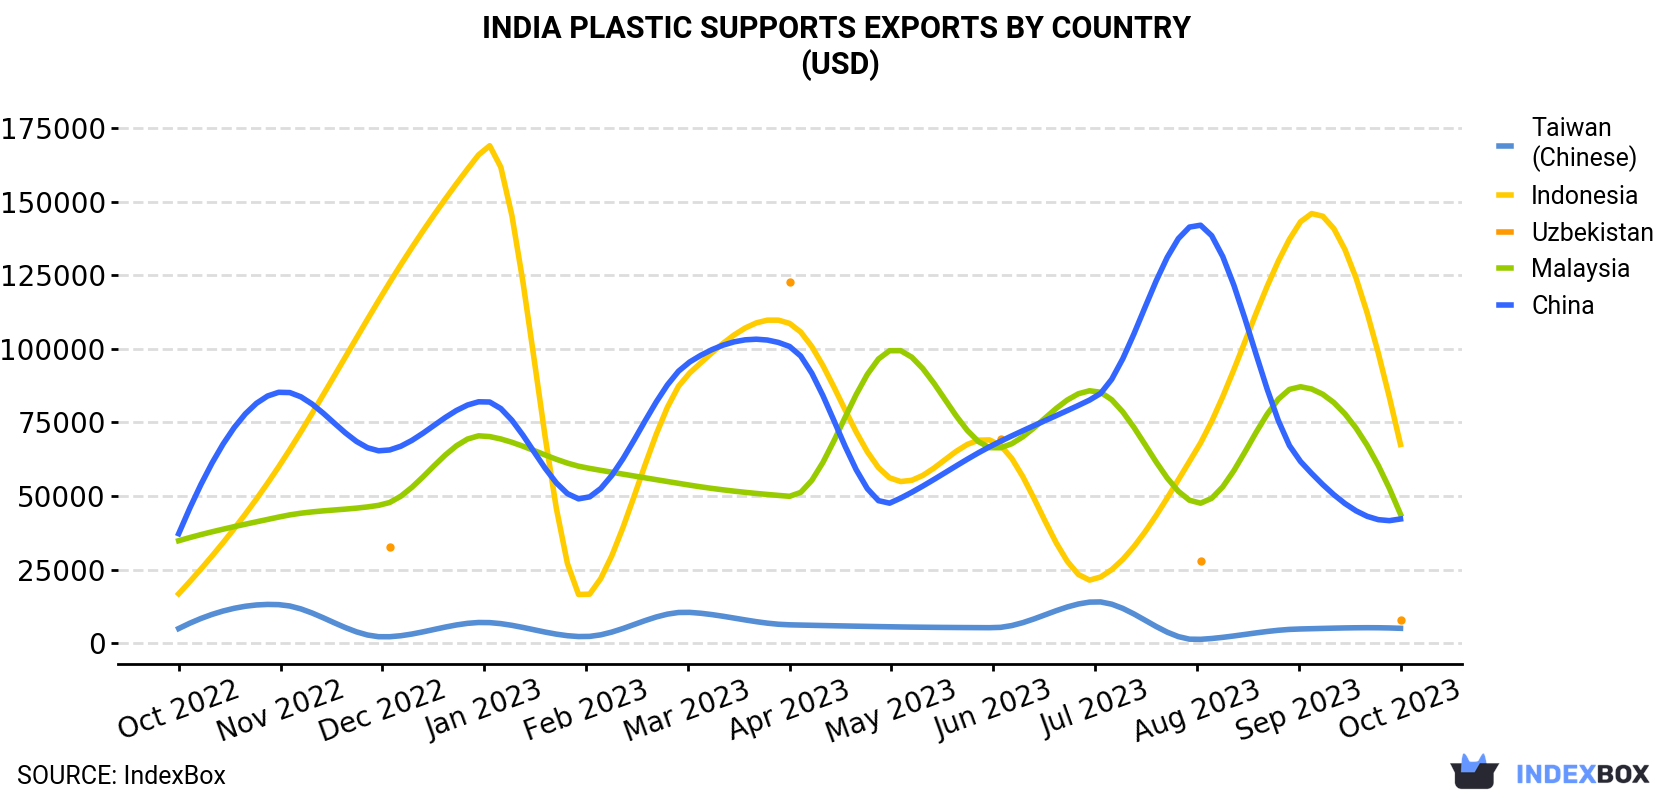 India Plastic Supports Exports By Country (USD)